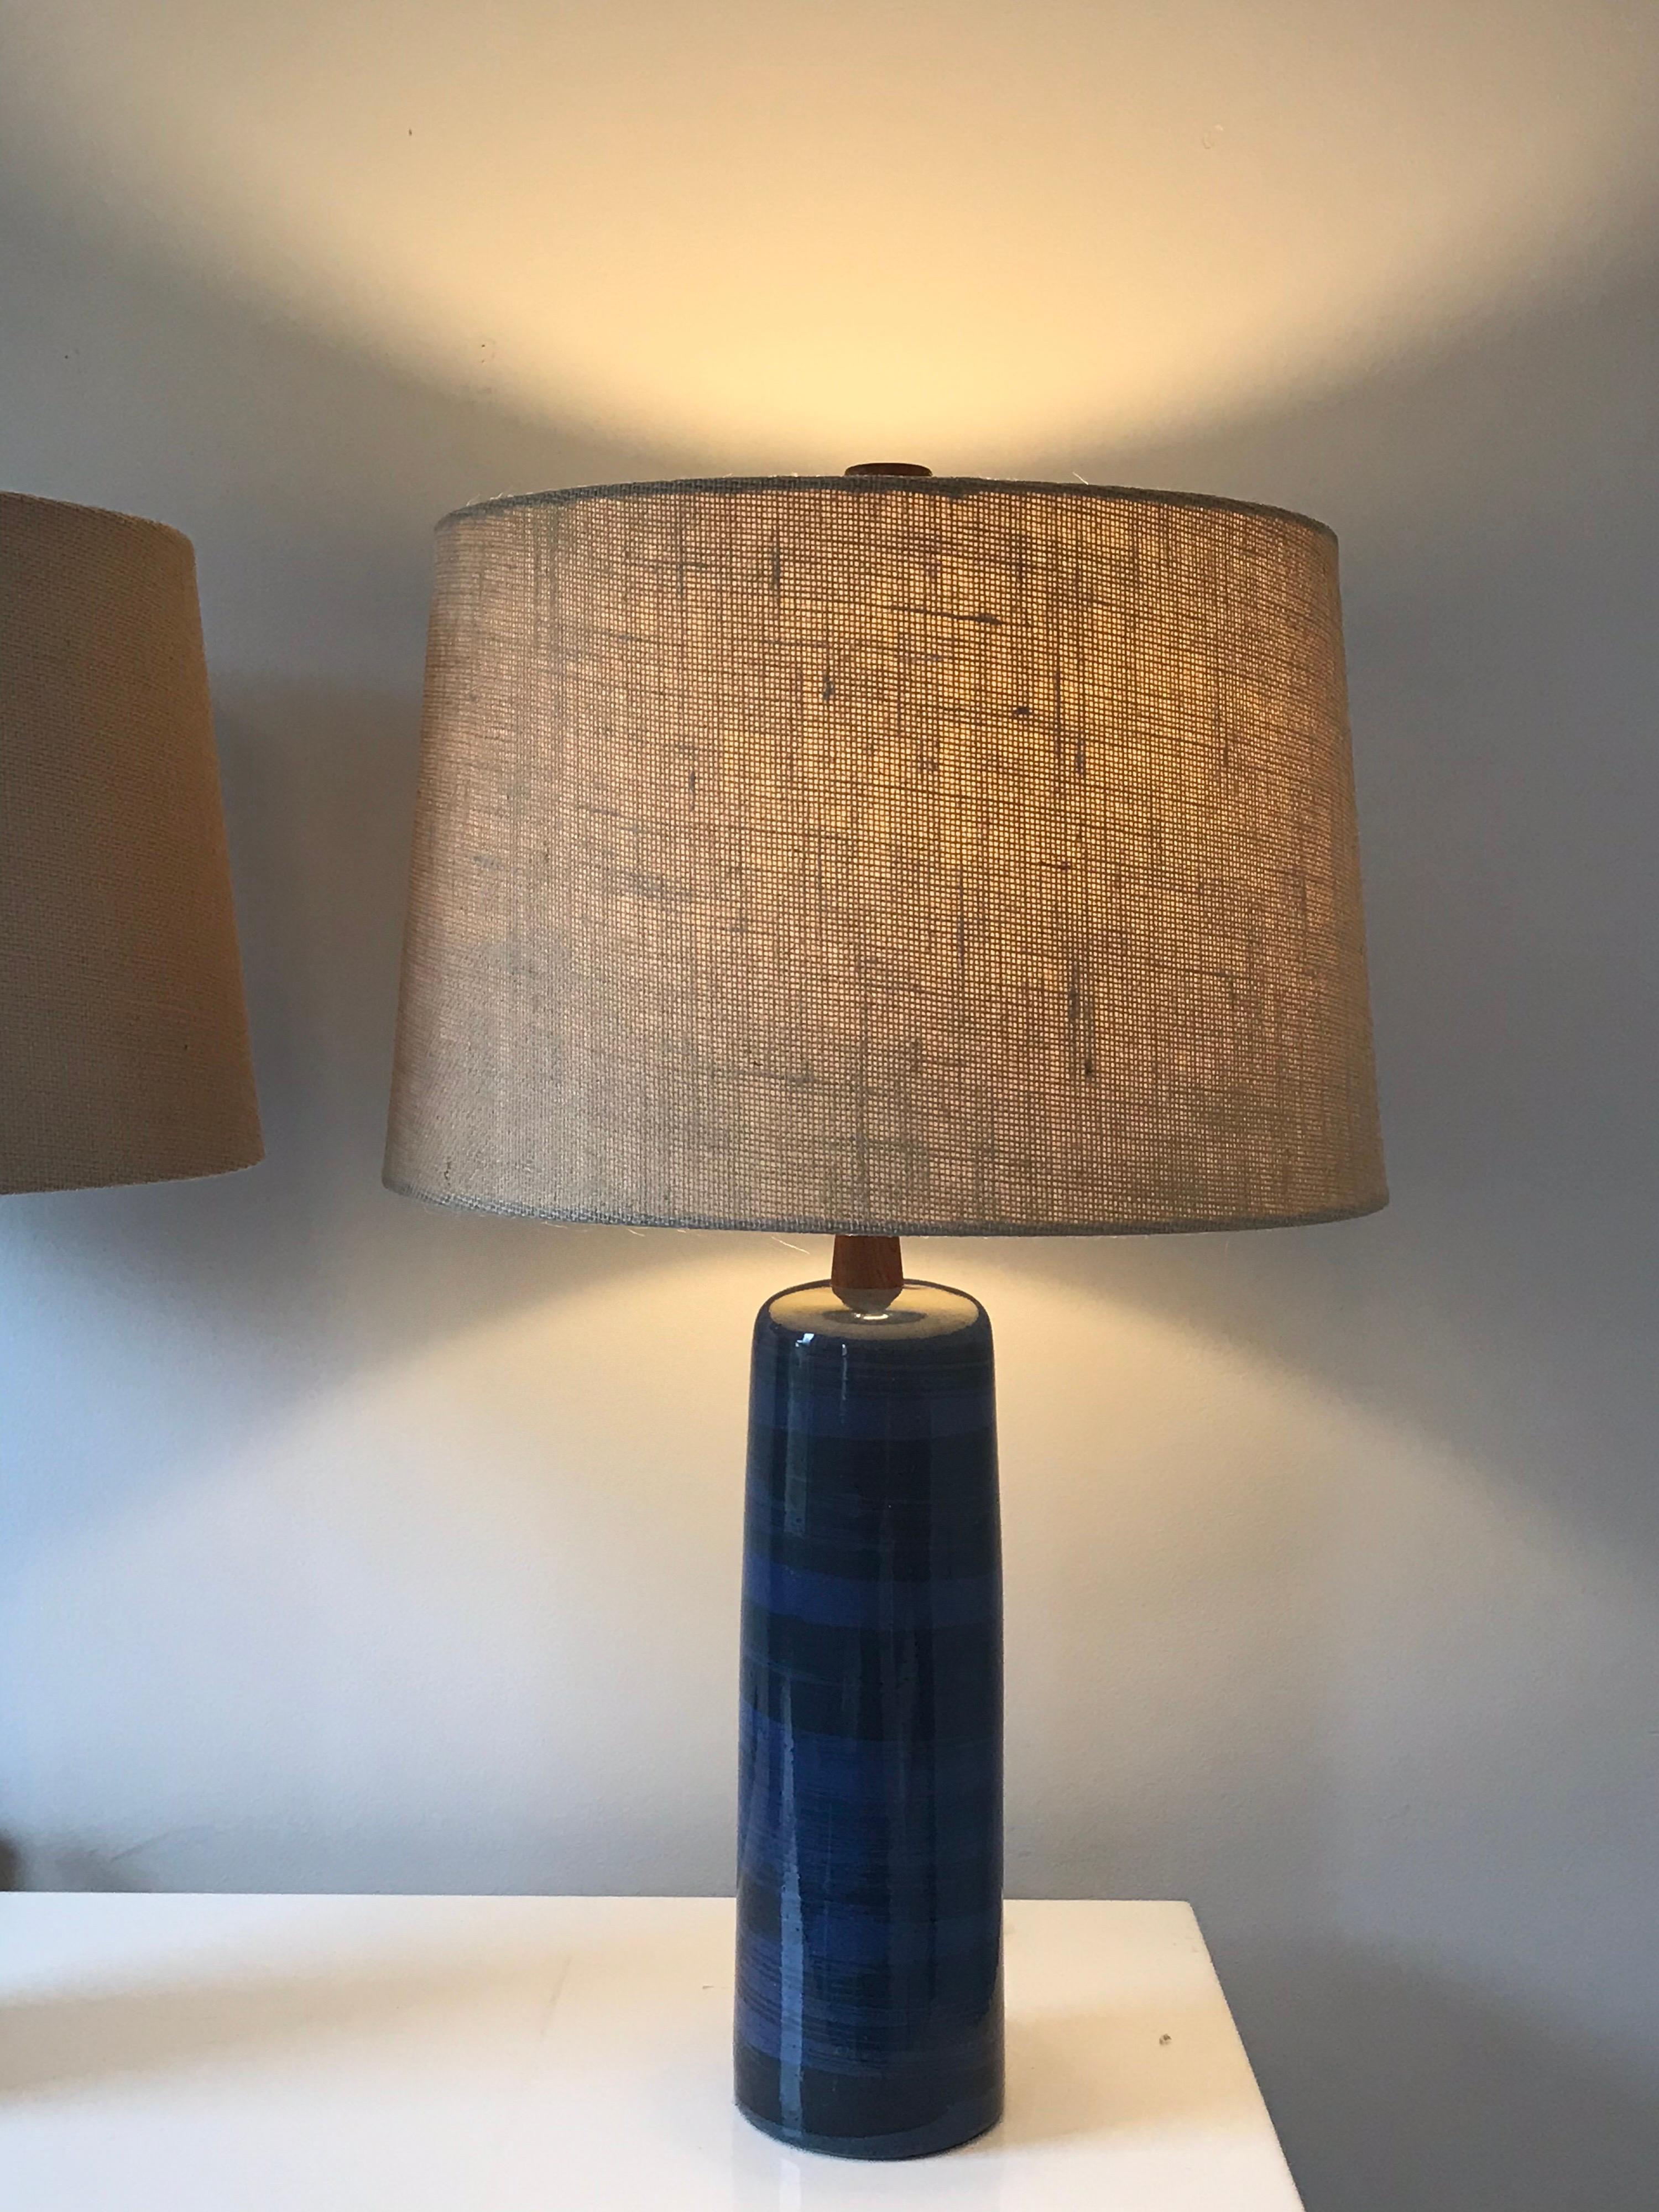 American Jane and Gordon Martz for Marshall Studio Pair of Large Lamps, Blue and Black